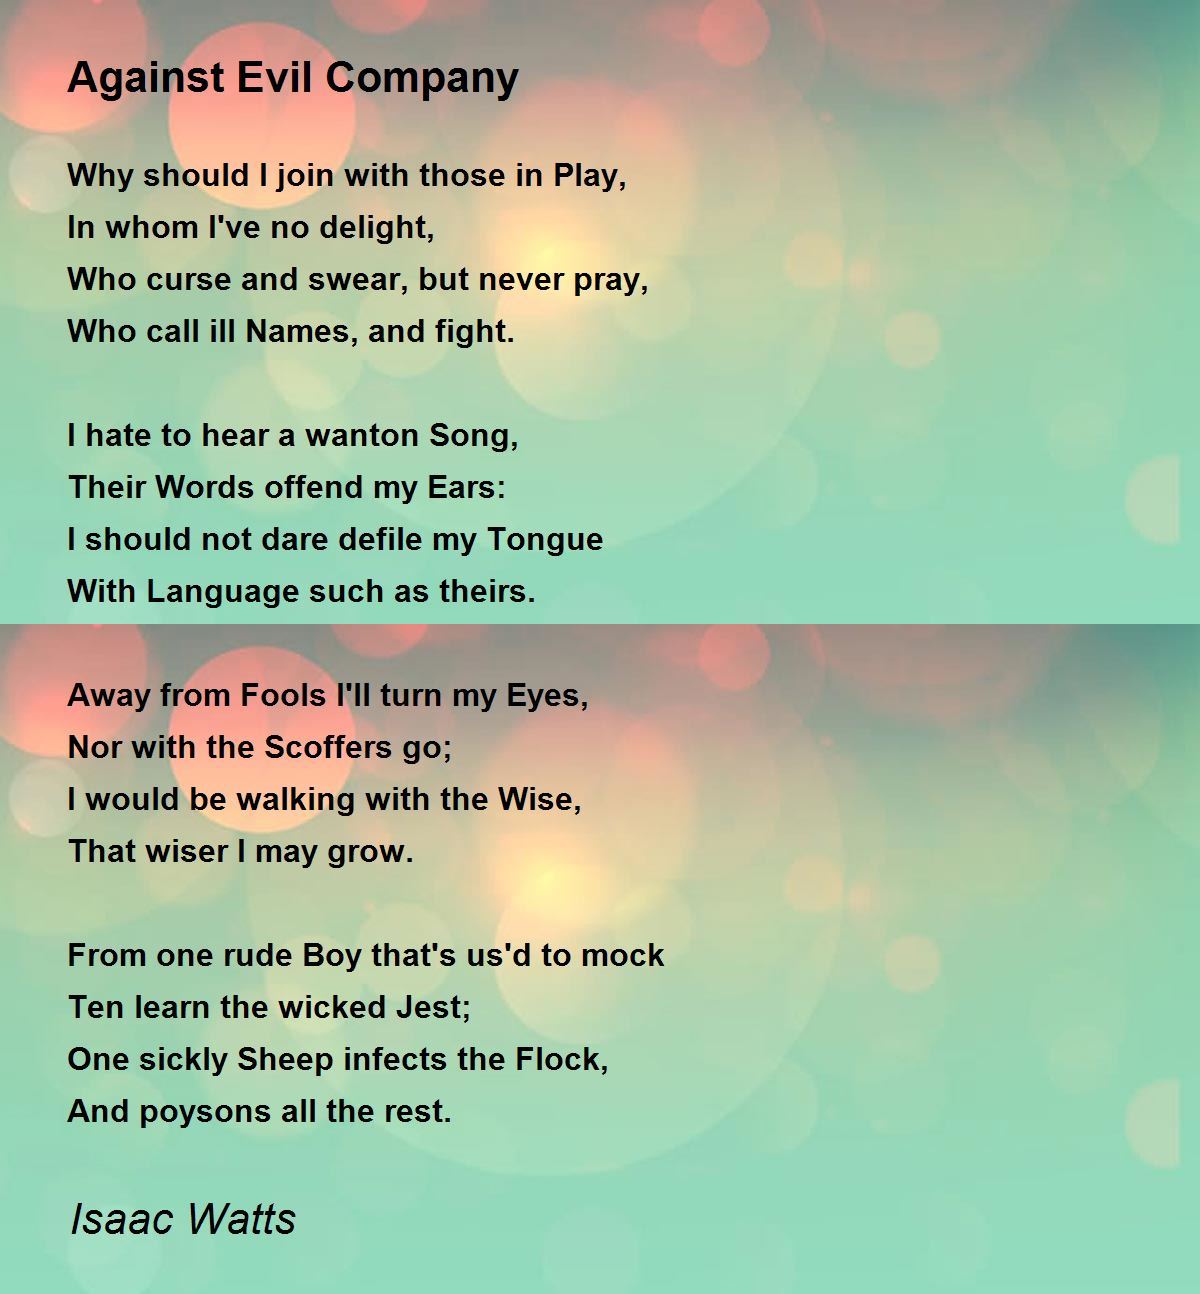 Against Evil Company Poem by Isaac Watts - Poem Hunter